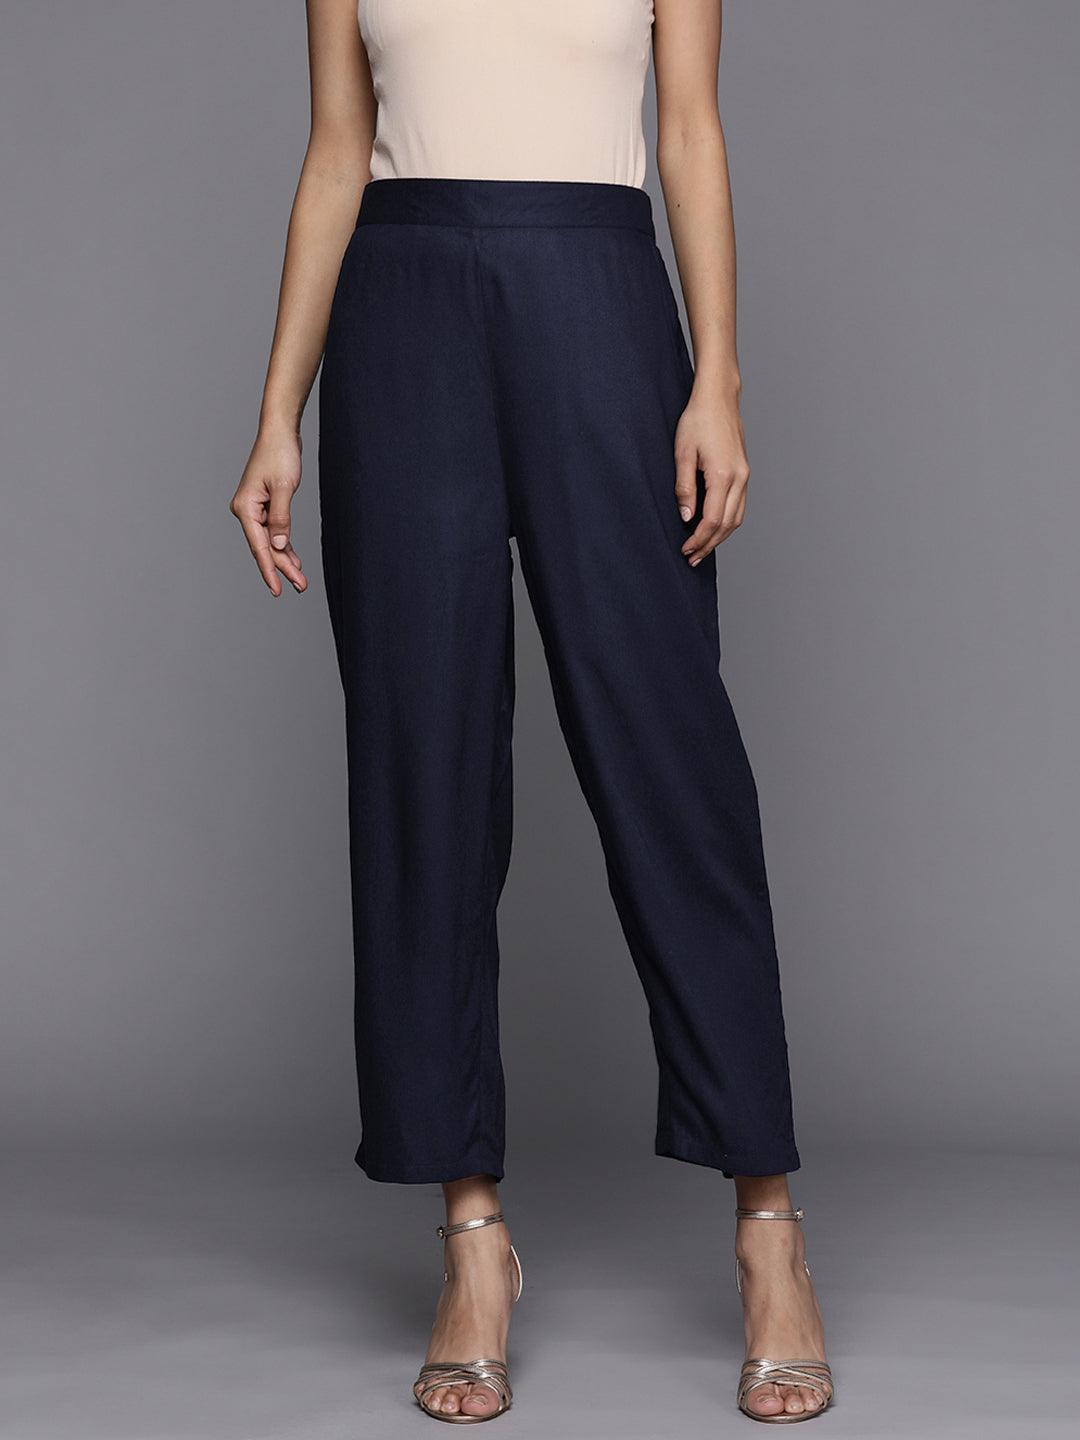 Blue Solid Pashmina Wool Trousers - Libas